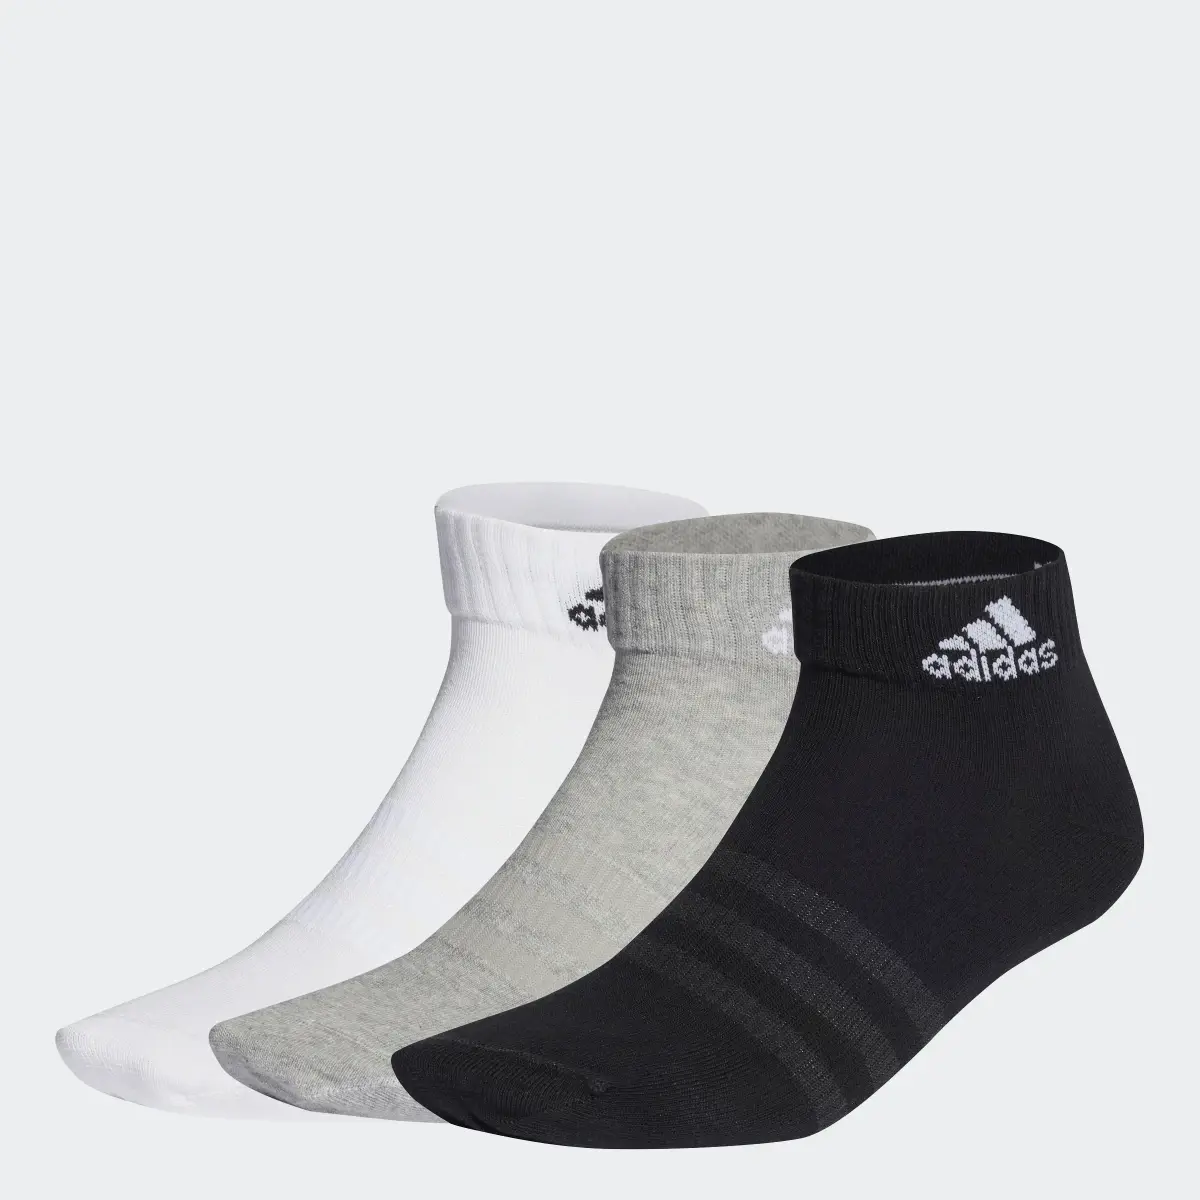 Adidas Thin and Light Ankle Socks 3 Pairs. 1